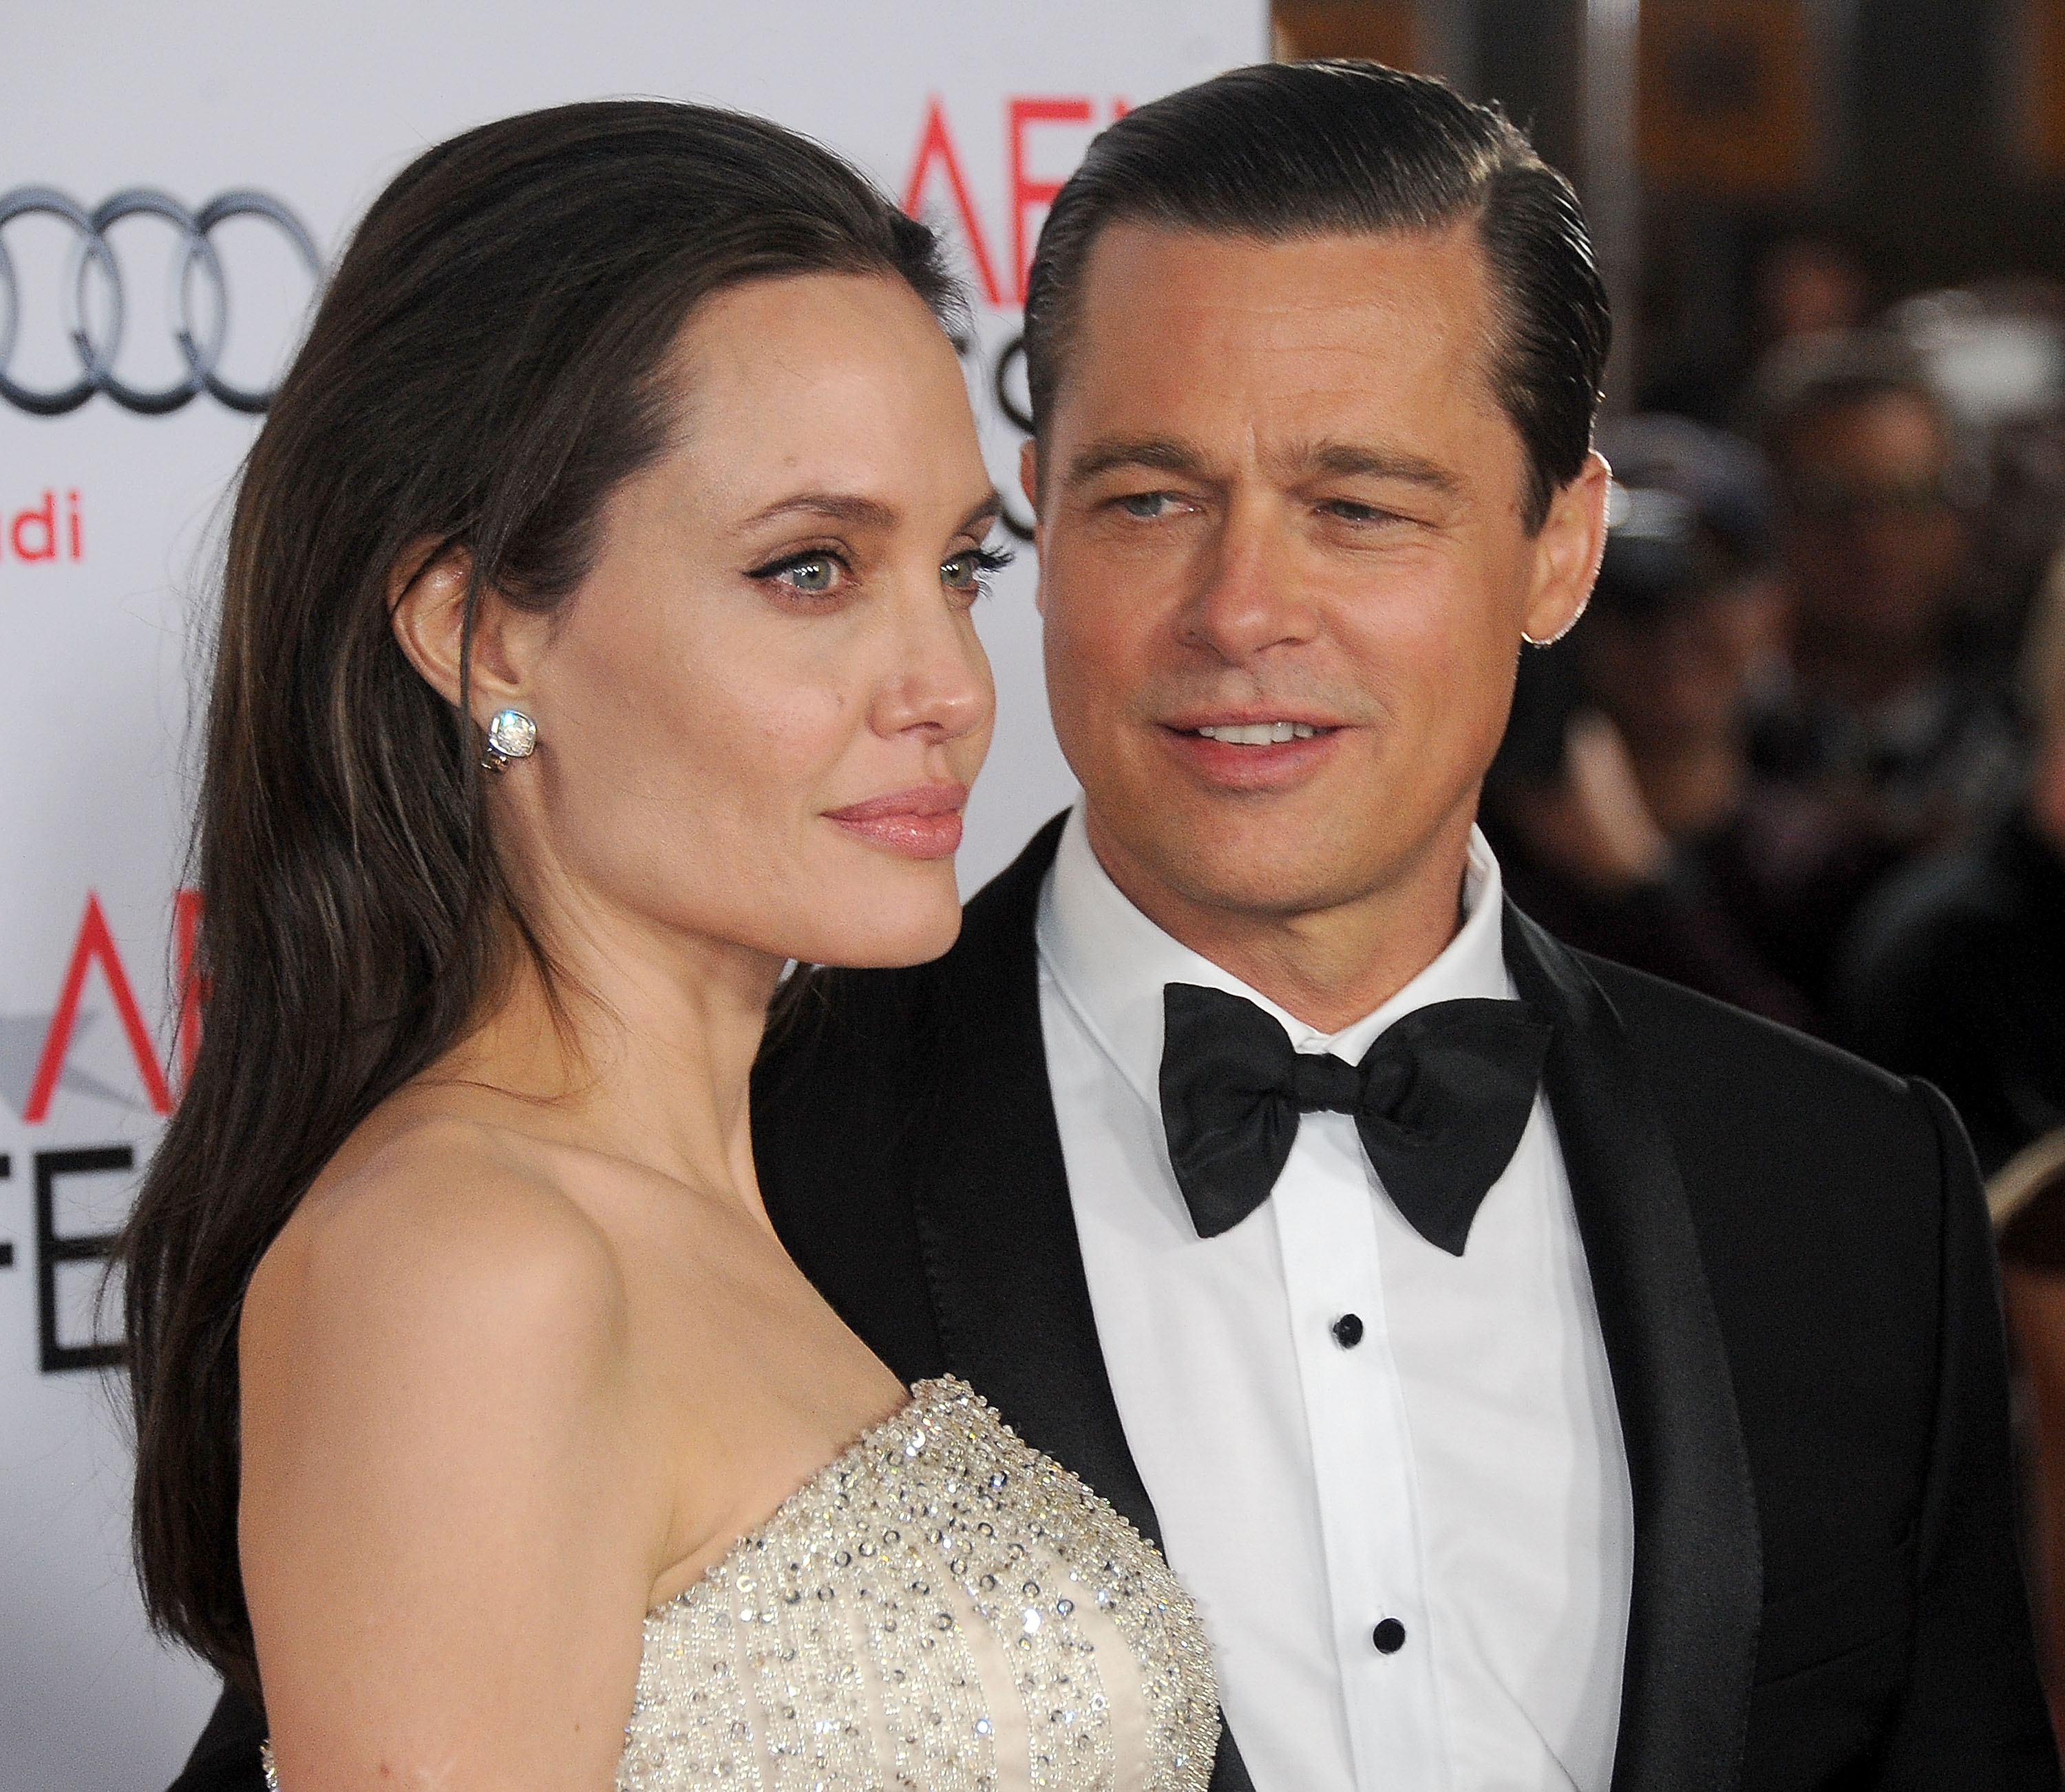 Angelina Jolie and Brad Pitt at the AFI FEST 2015 in Hollywood | Source: Getty Images